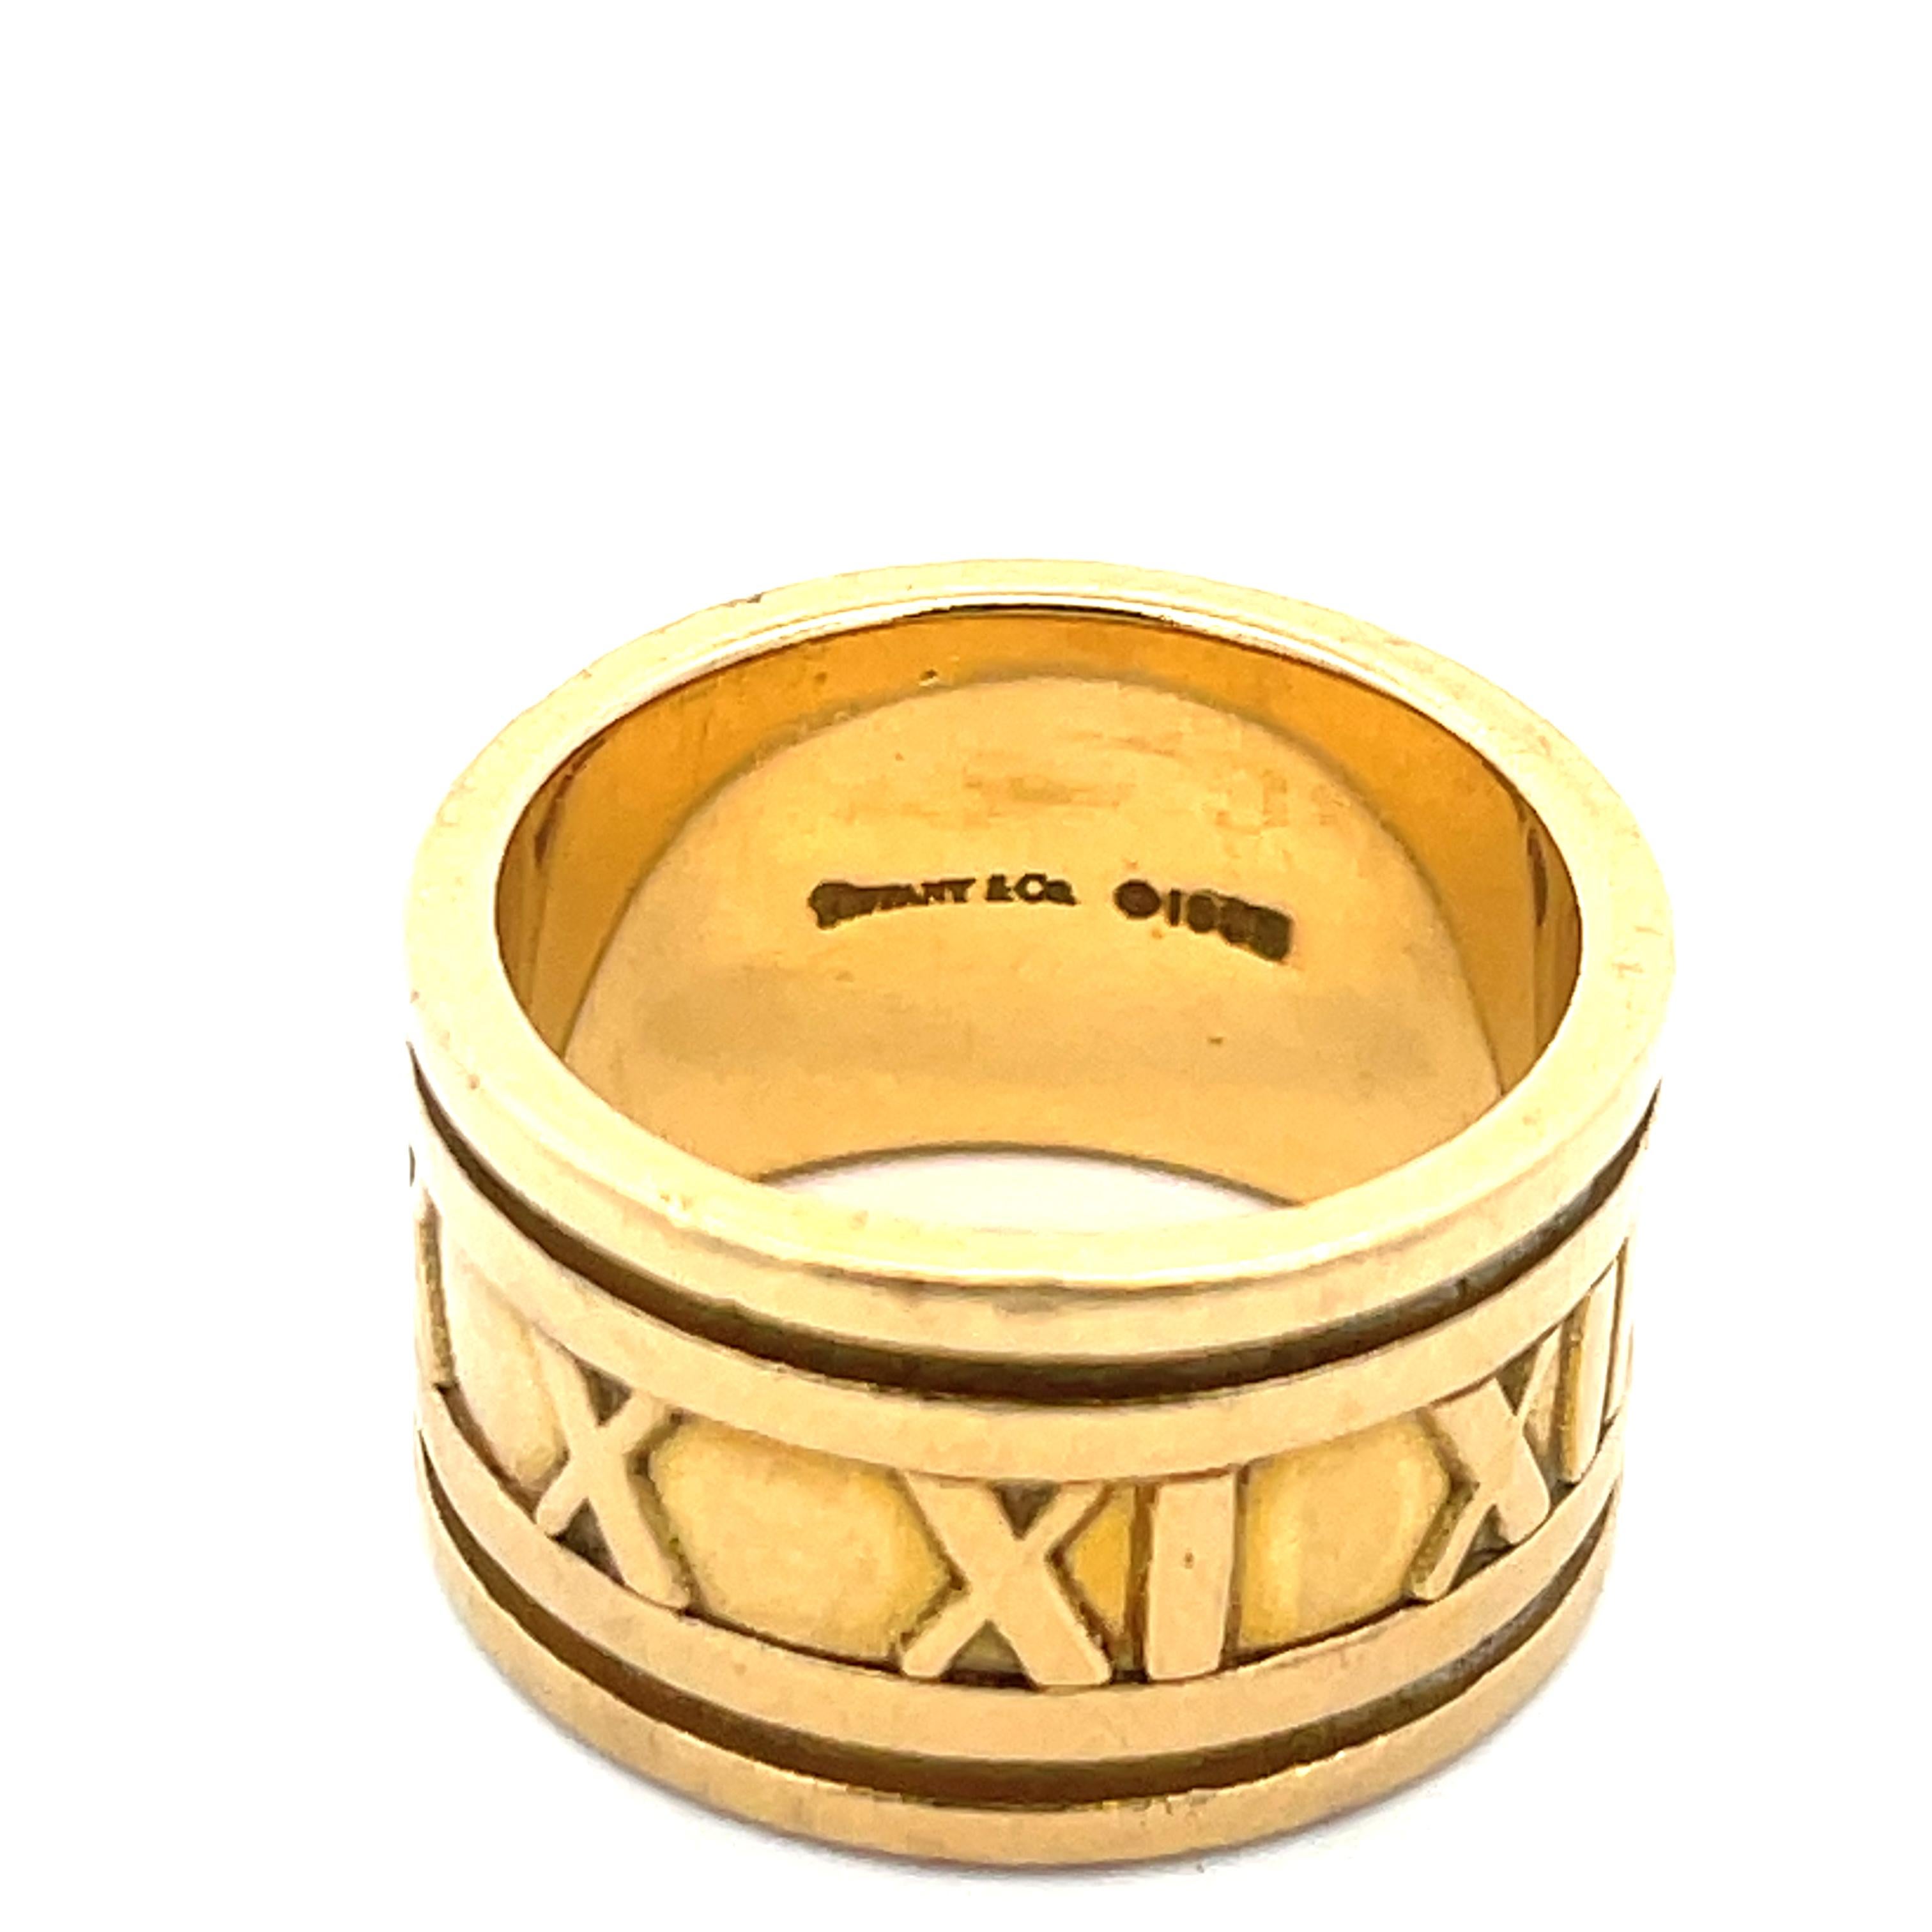 Tiffany & Co, Atlas Ring in 18K Yellow Gold. The ring is 12mm wide, rings size 6 1/2, and weighs 15 grams. Stamped Tiffany & Co 1995 7501 Italy.